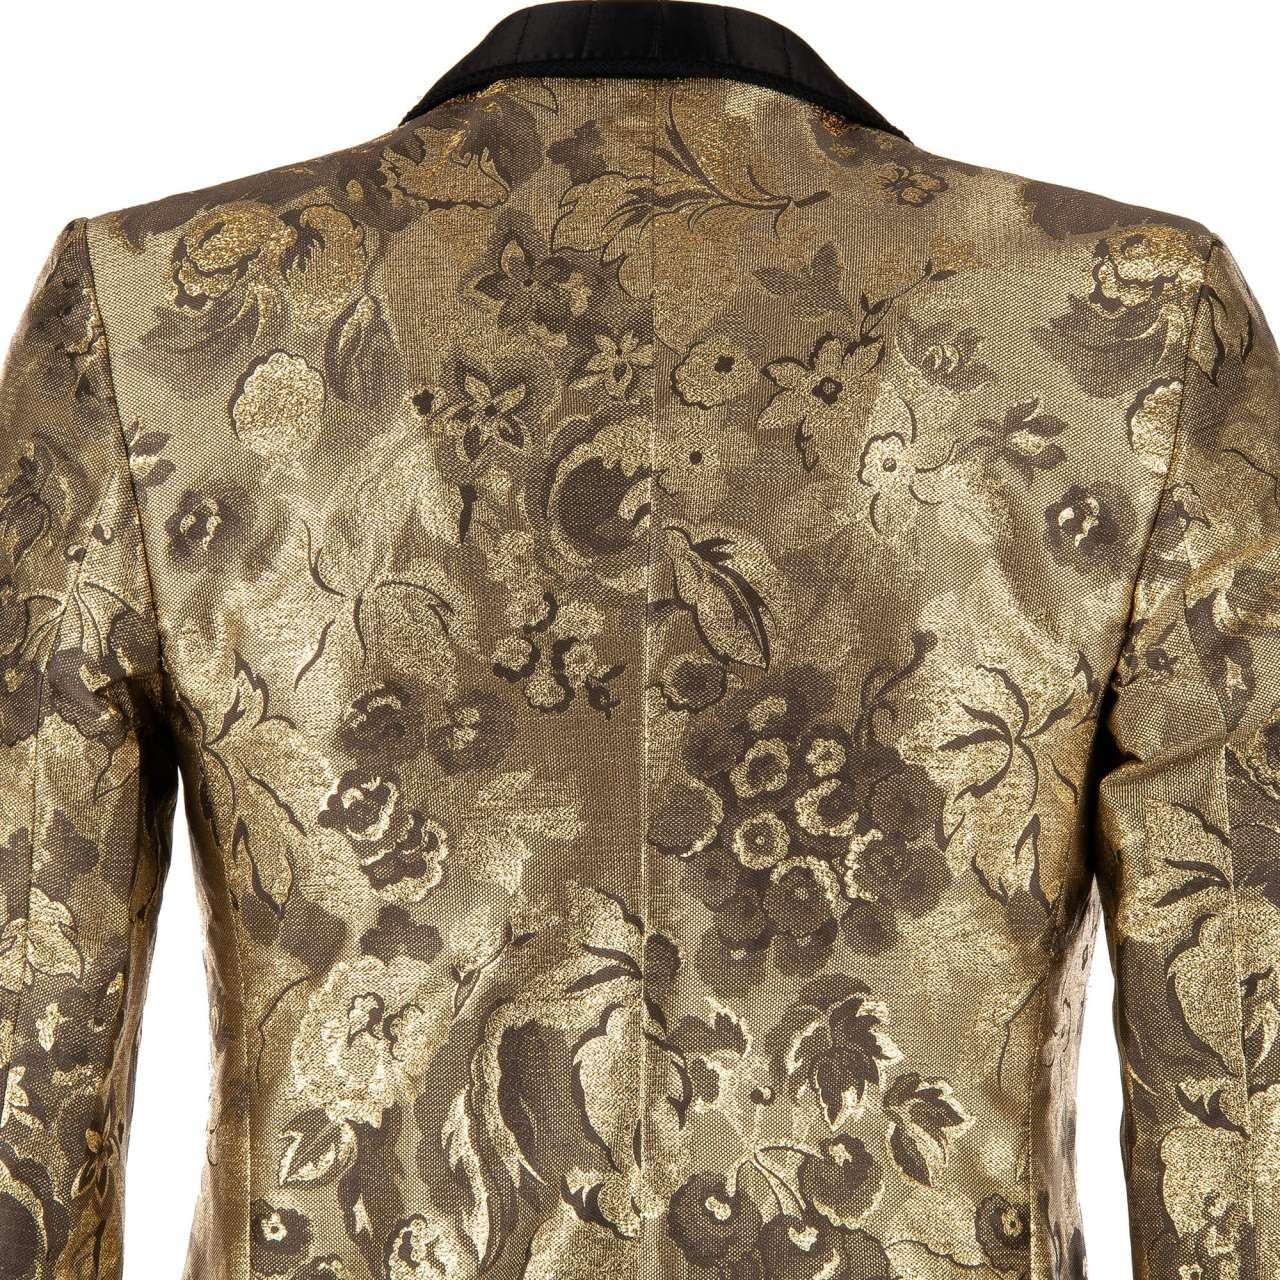 Dolce & Gabbana Baroque Floral Tuxedo Blazer with Rope Closure Black Gold 46 For Sale 1